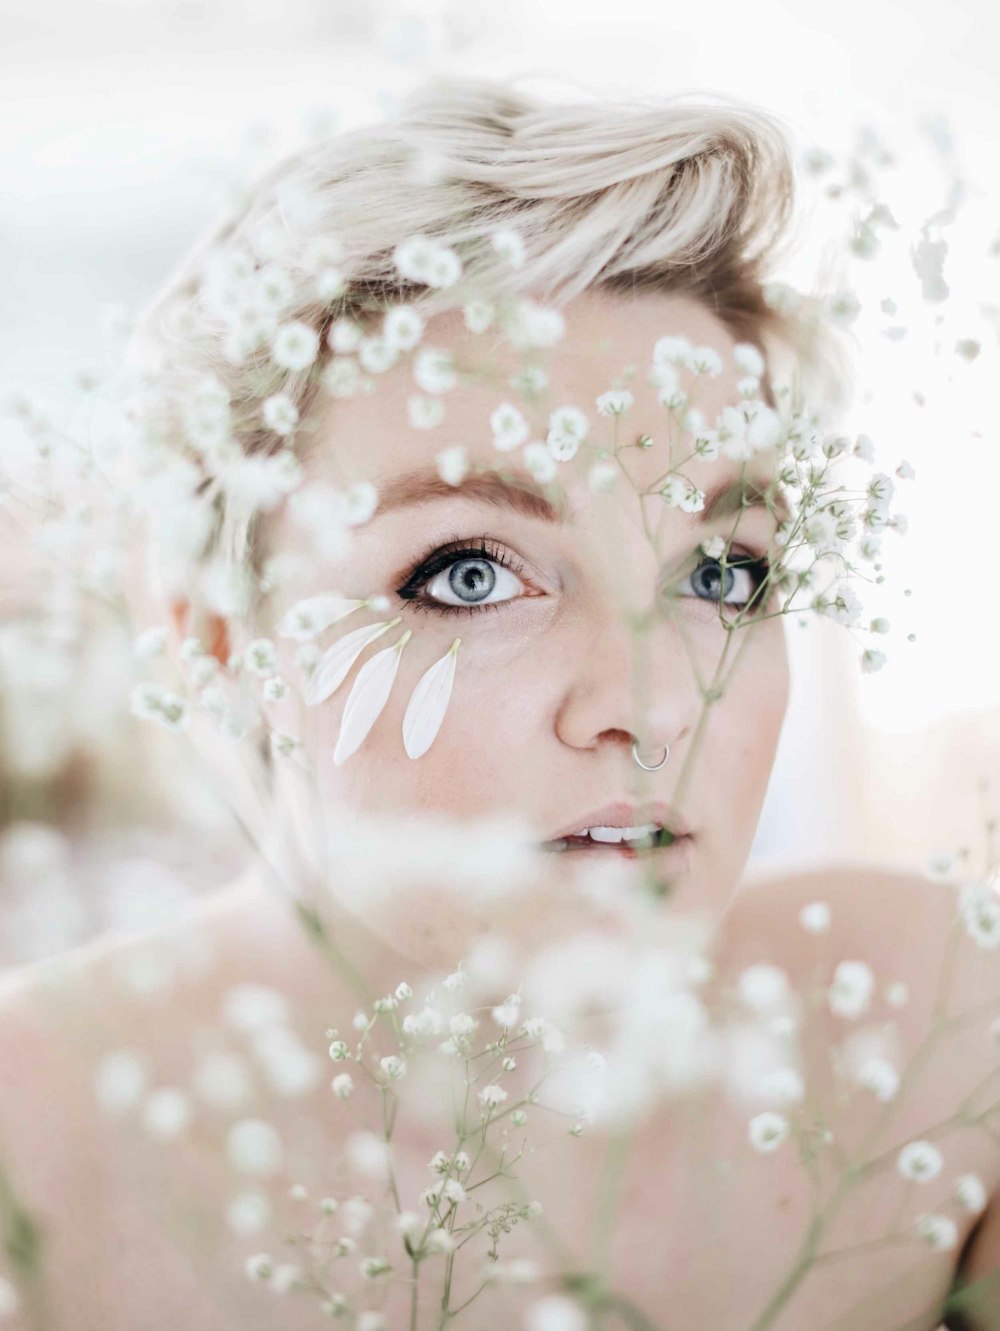 woman with blonde hair with water droplets